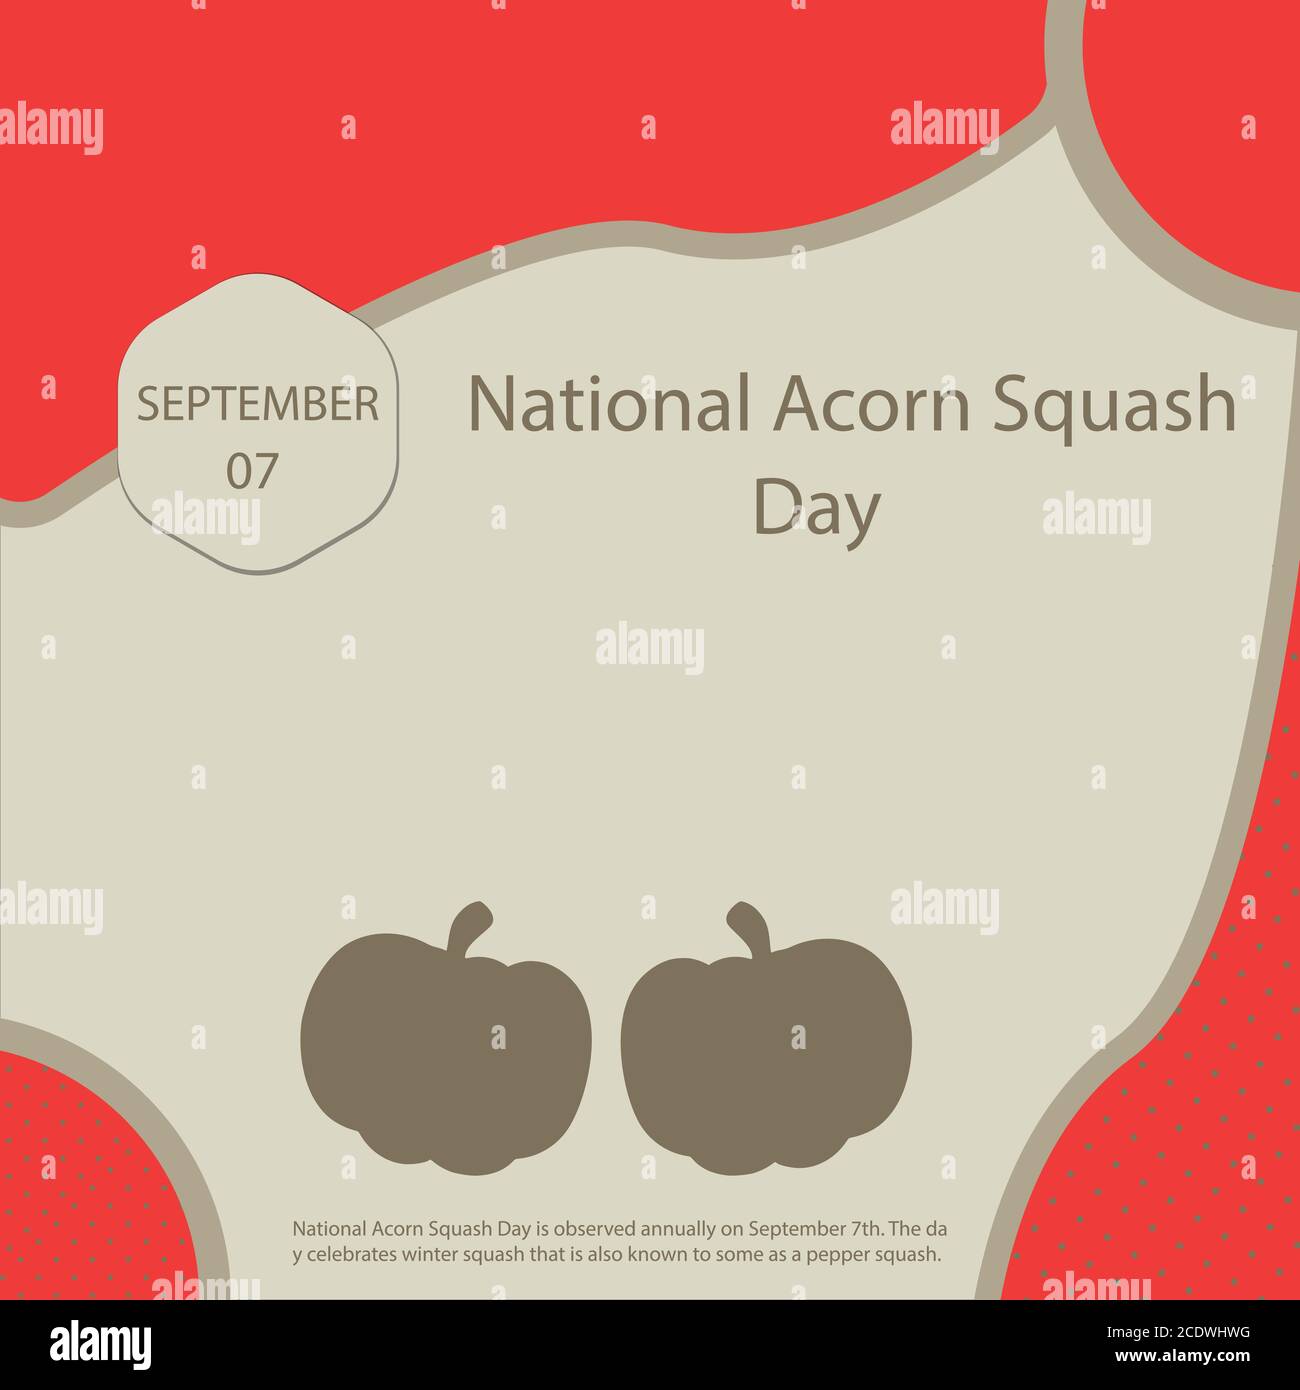 National Acorn Squash Day is observed annually on September 7th. The day celebrates winter squash that is also known to some as a pepper squash. Stock Vector